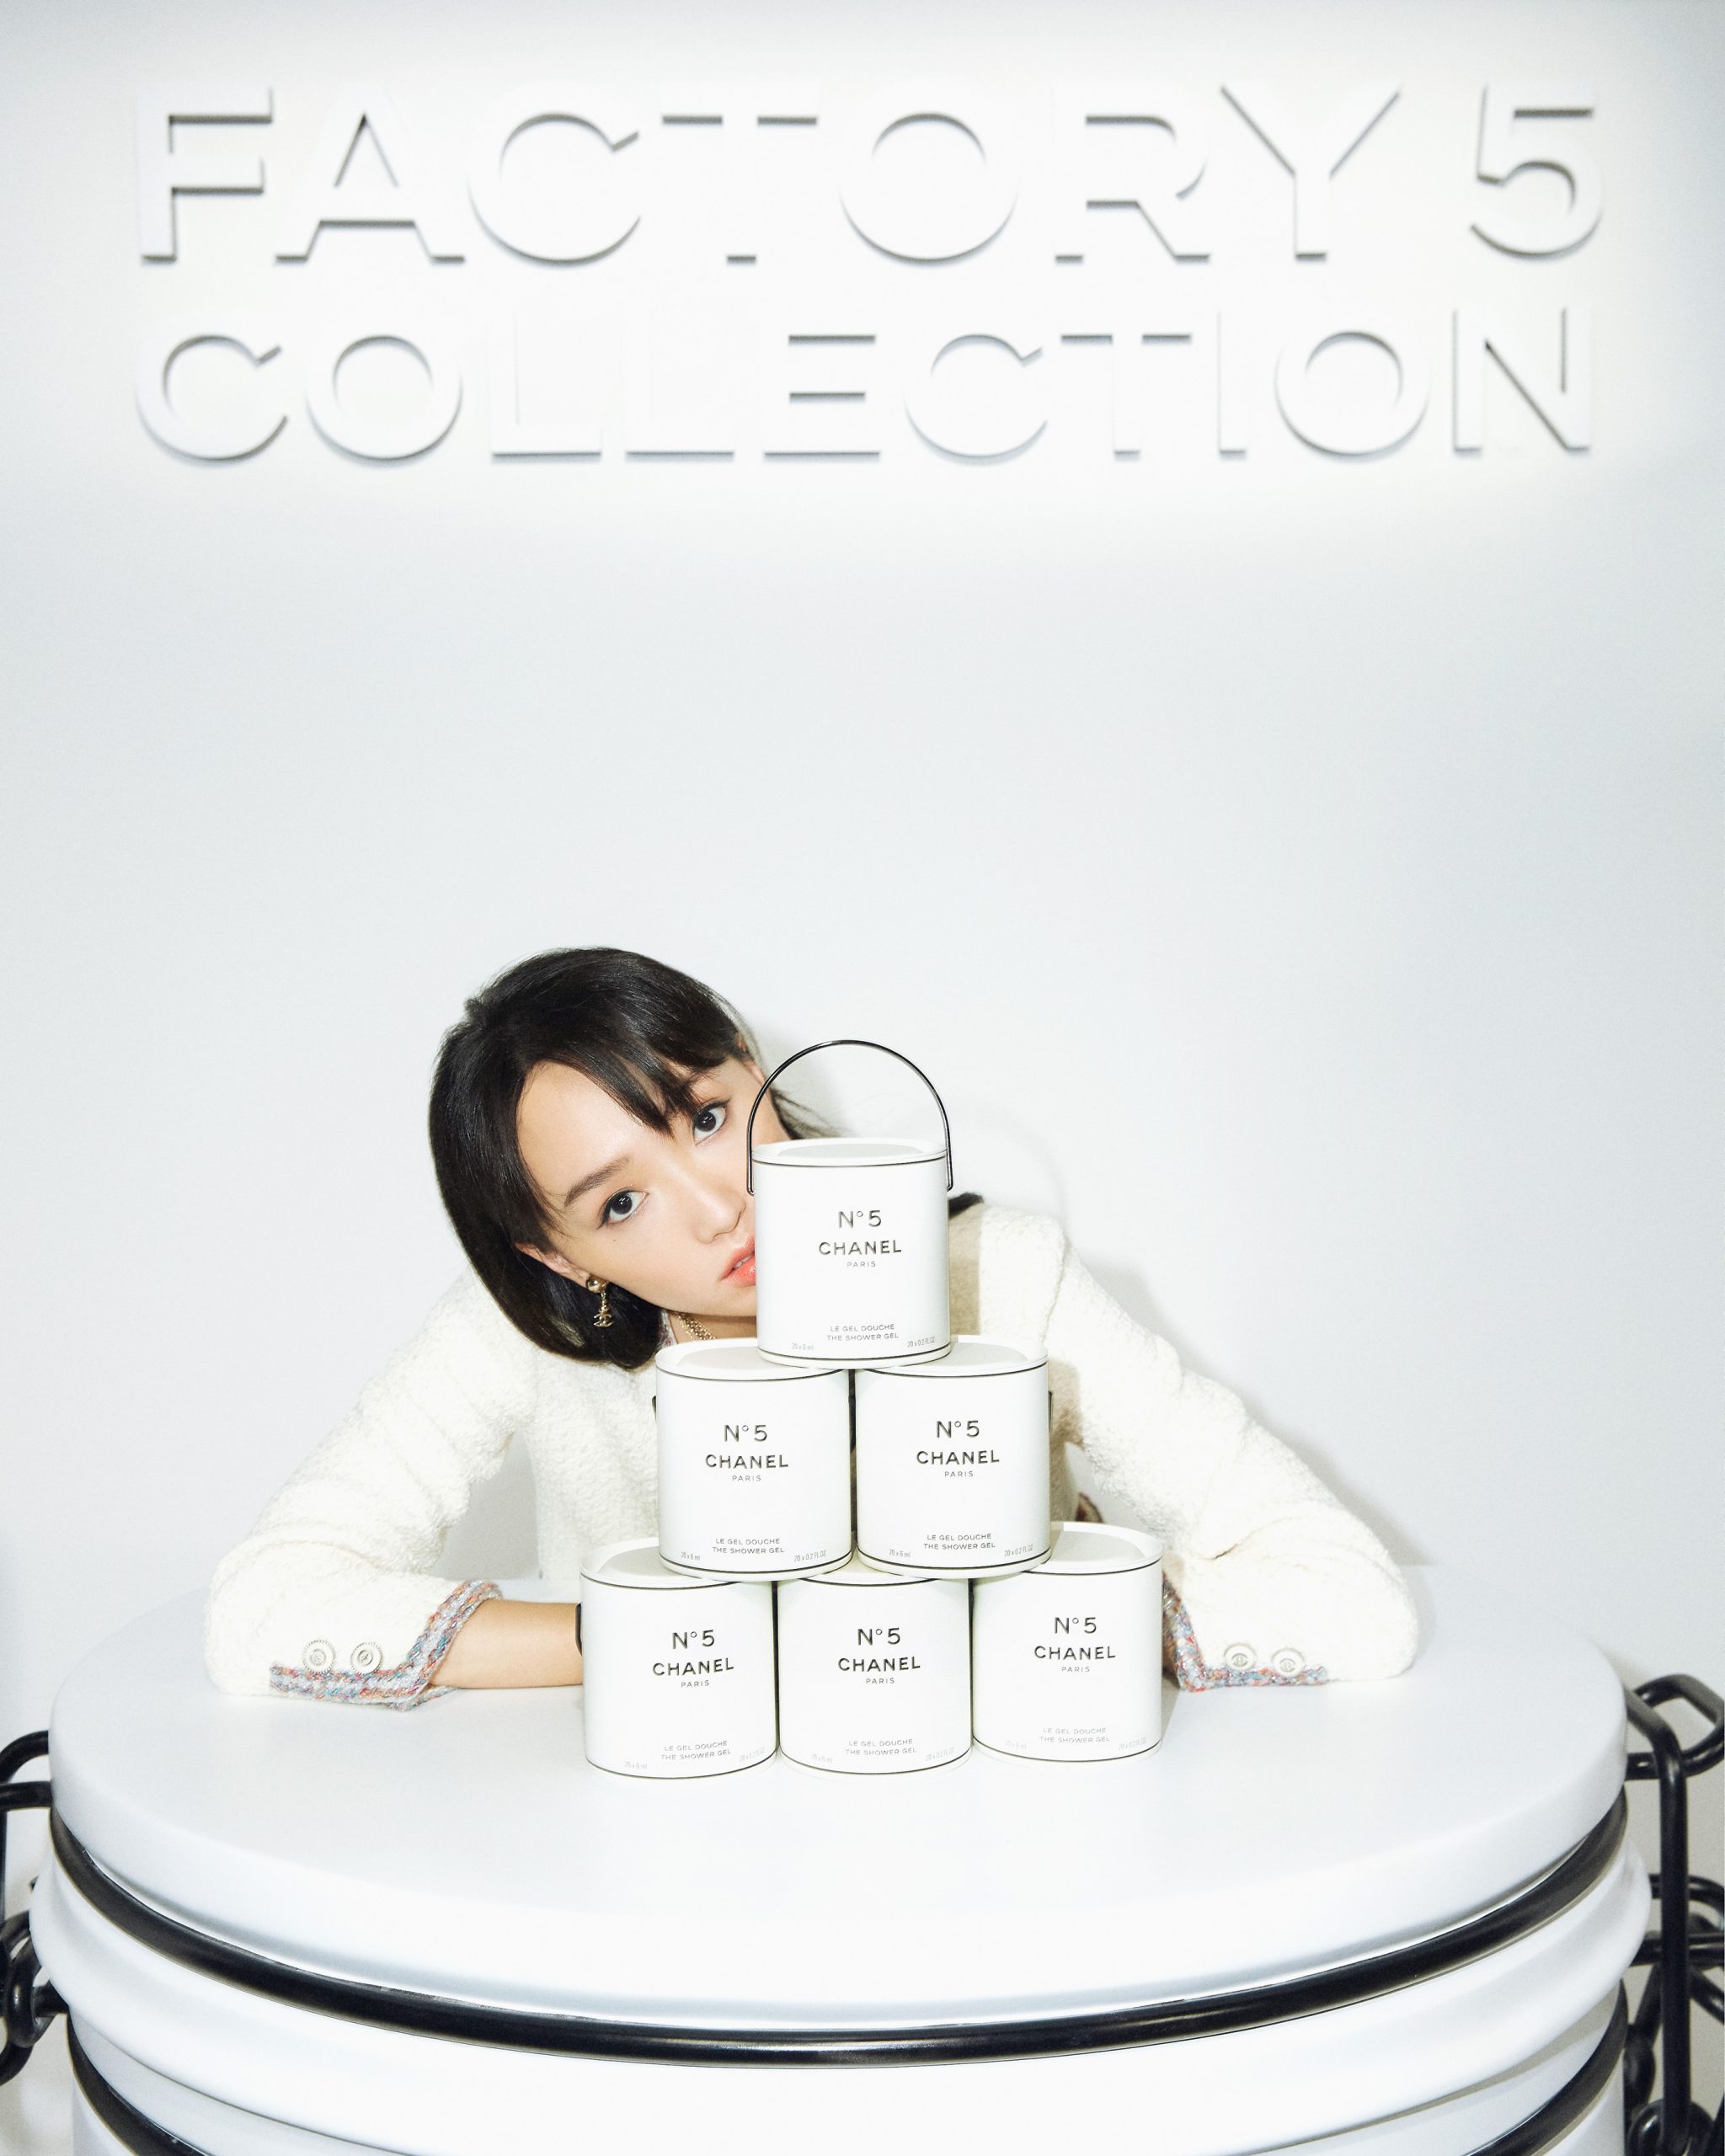 Objects of desire: The limited-edition Chanel Factory 5 collection -  Hashtag Legend